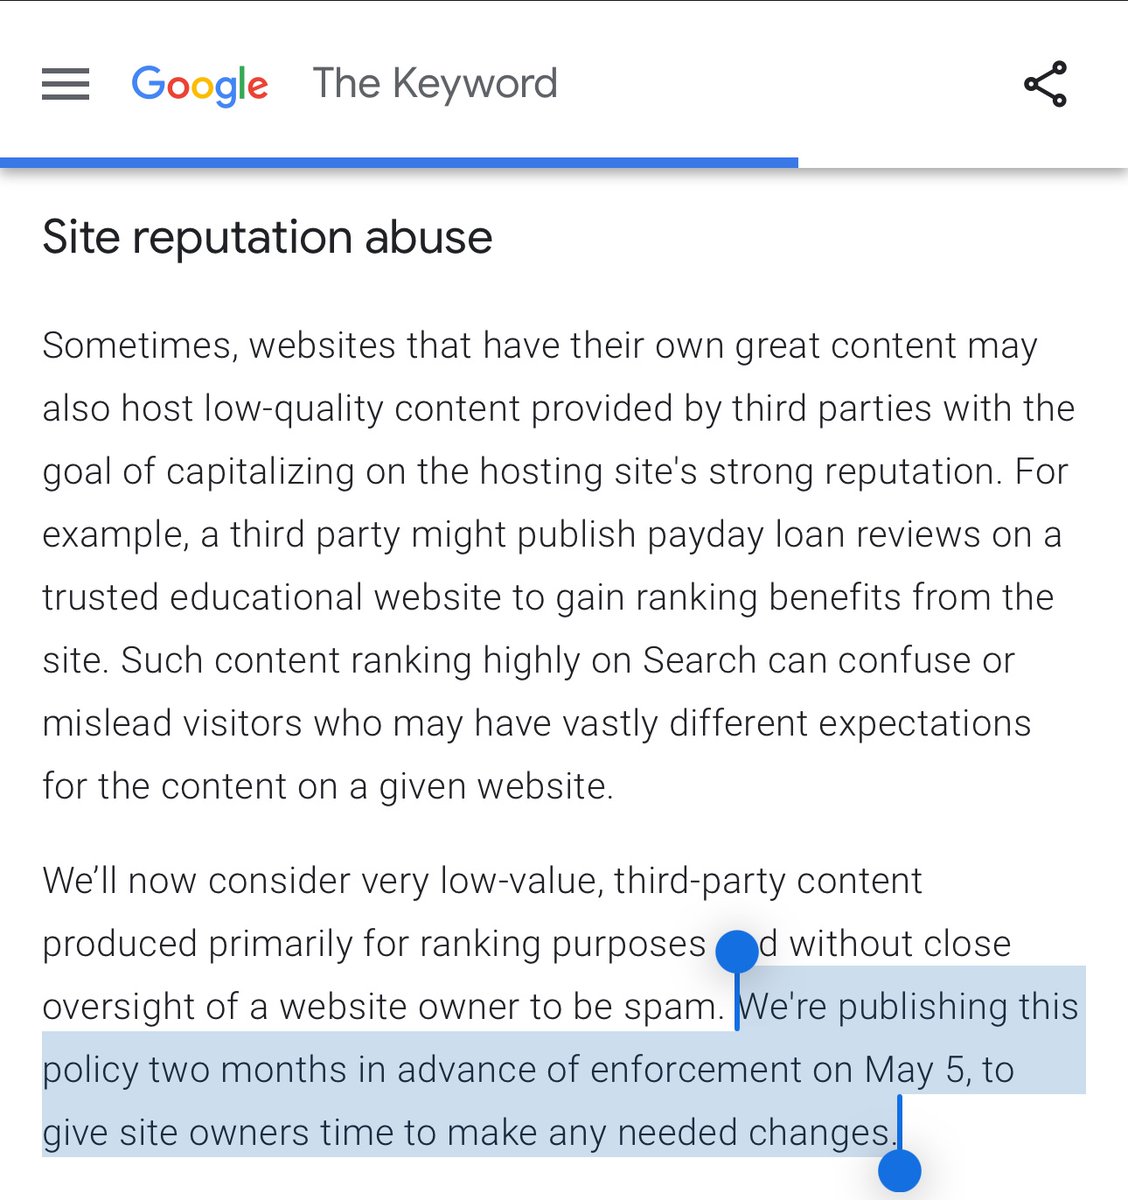 The March core update came with the introduction of new policies that would allow Google to “take more targeted action” against spam. One of these new spam policies is ‘site reputation abuse.’ So, how are big media sites preparing for the May 5th deadline from Google? 🧵